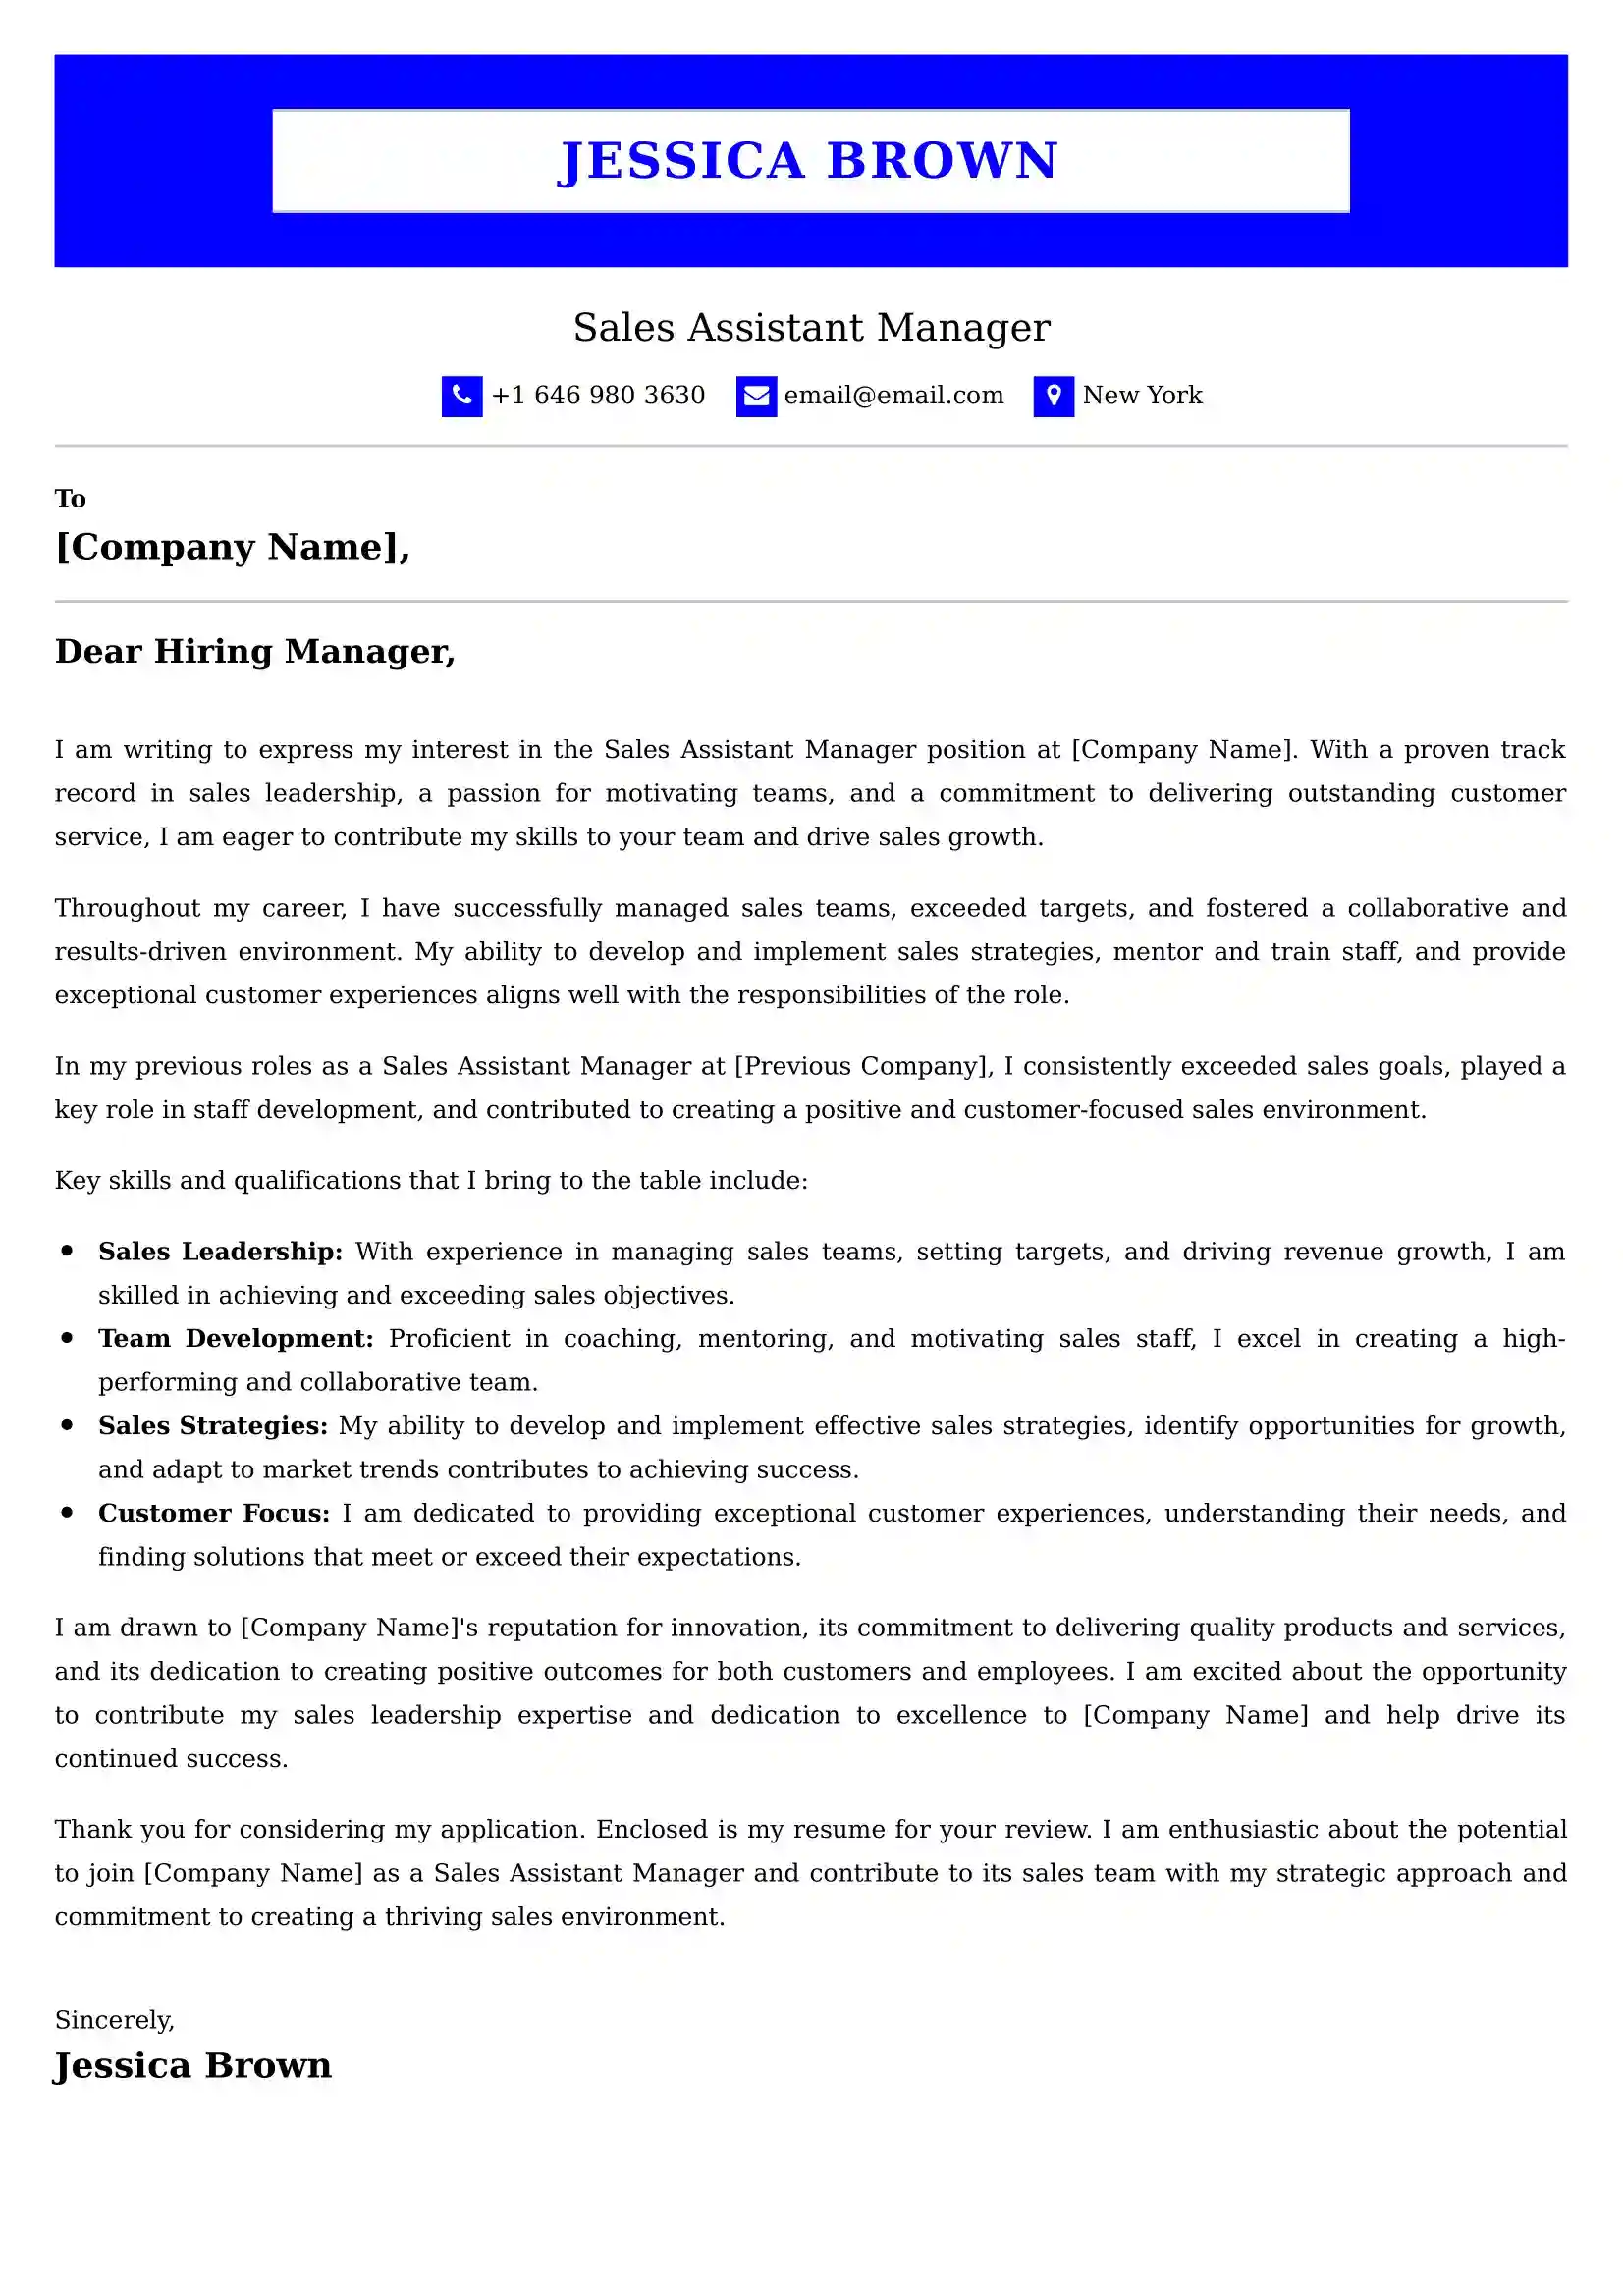 Sales Assistant Manager Cover Letter Examples Australia